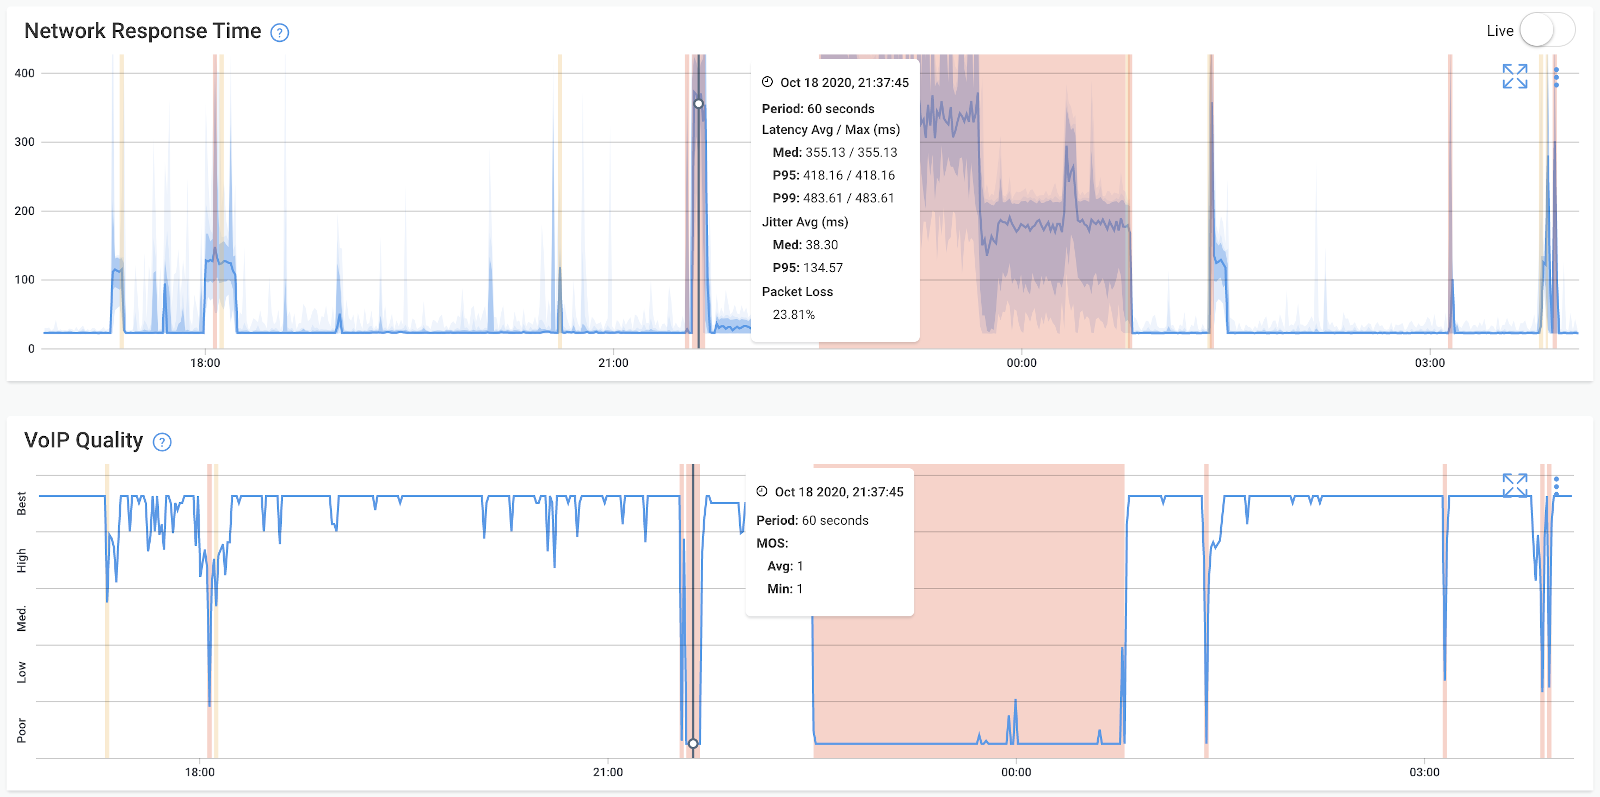 Network Performance Monitoring Response Time Network Issues - How to Identify Network Problems & Diagnose Network Issues